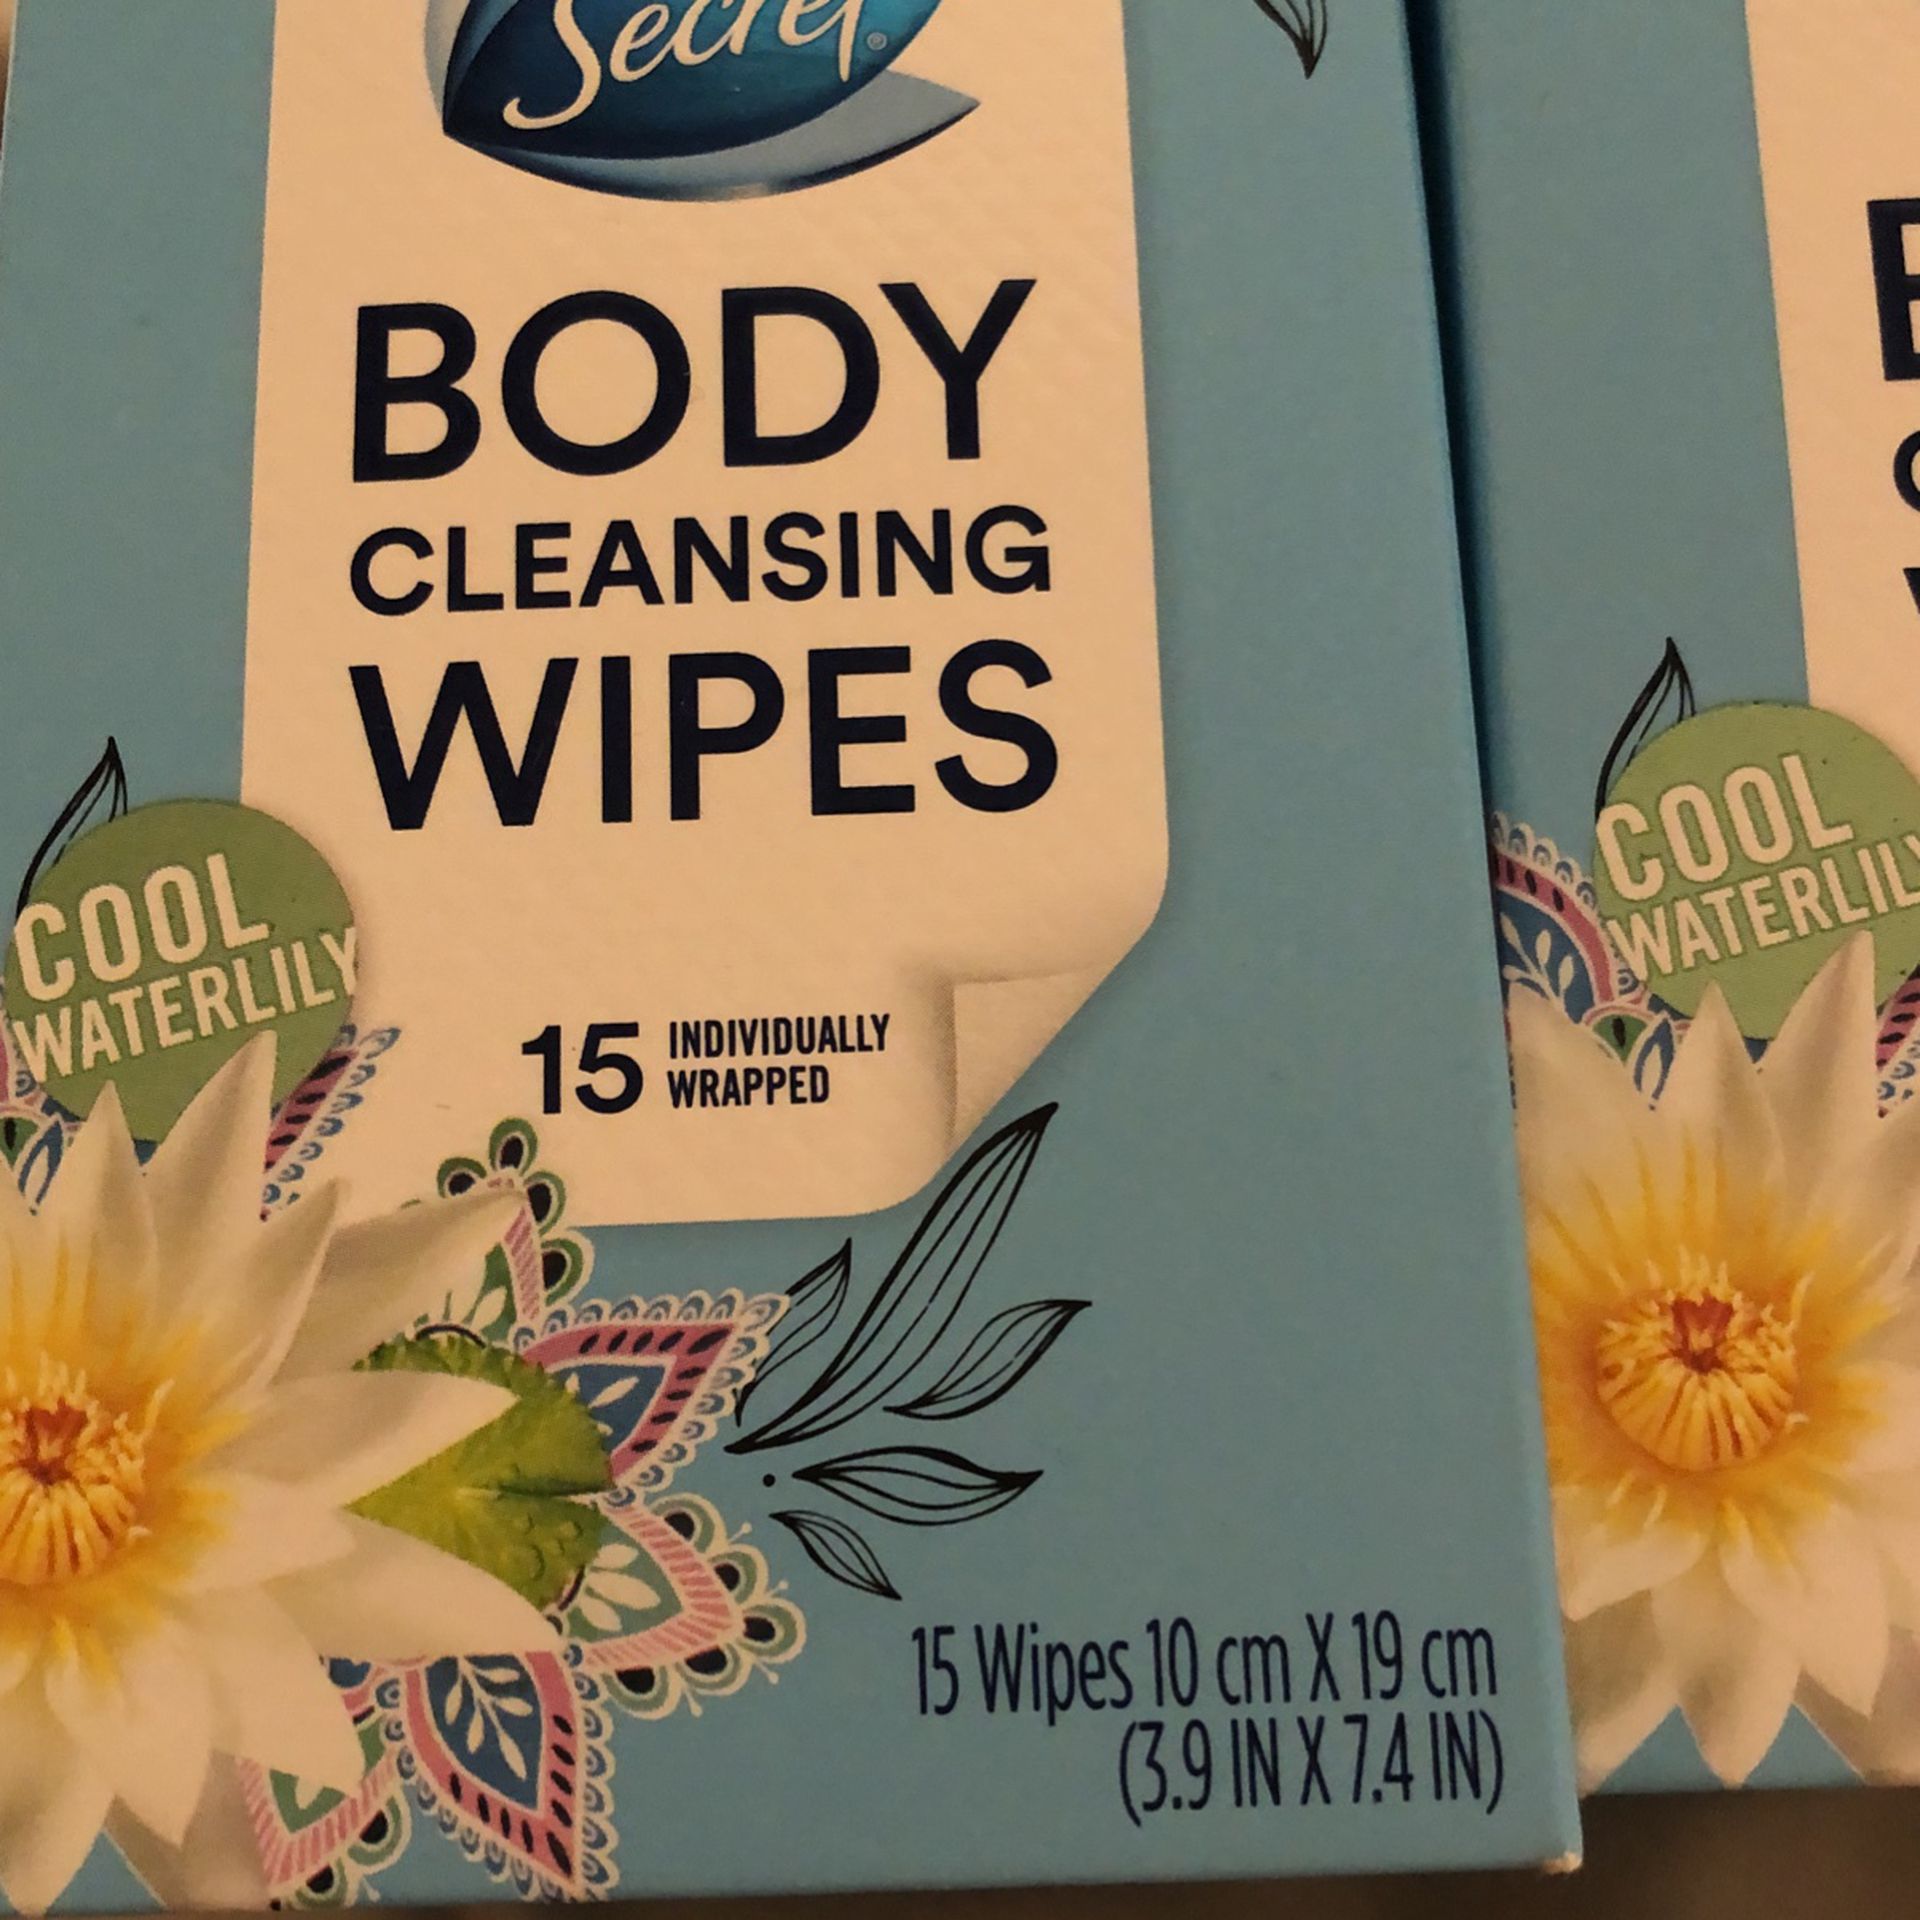 3 Secret Body Cleansing Wipes